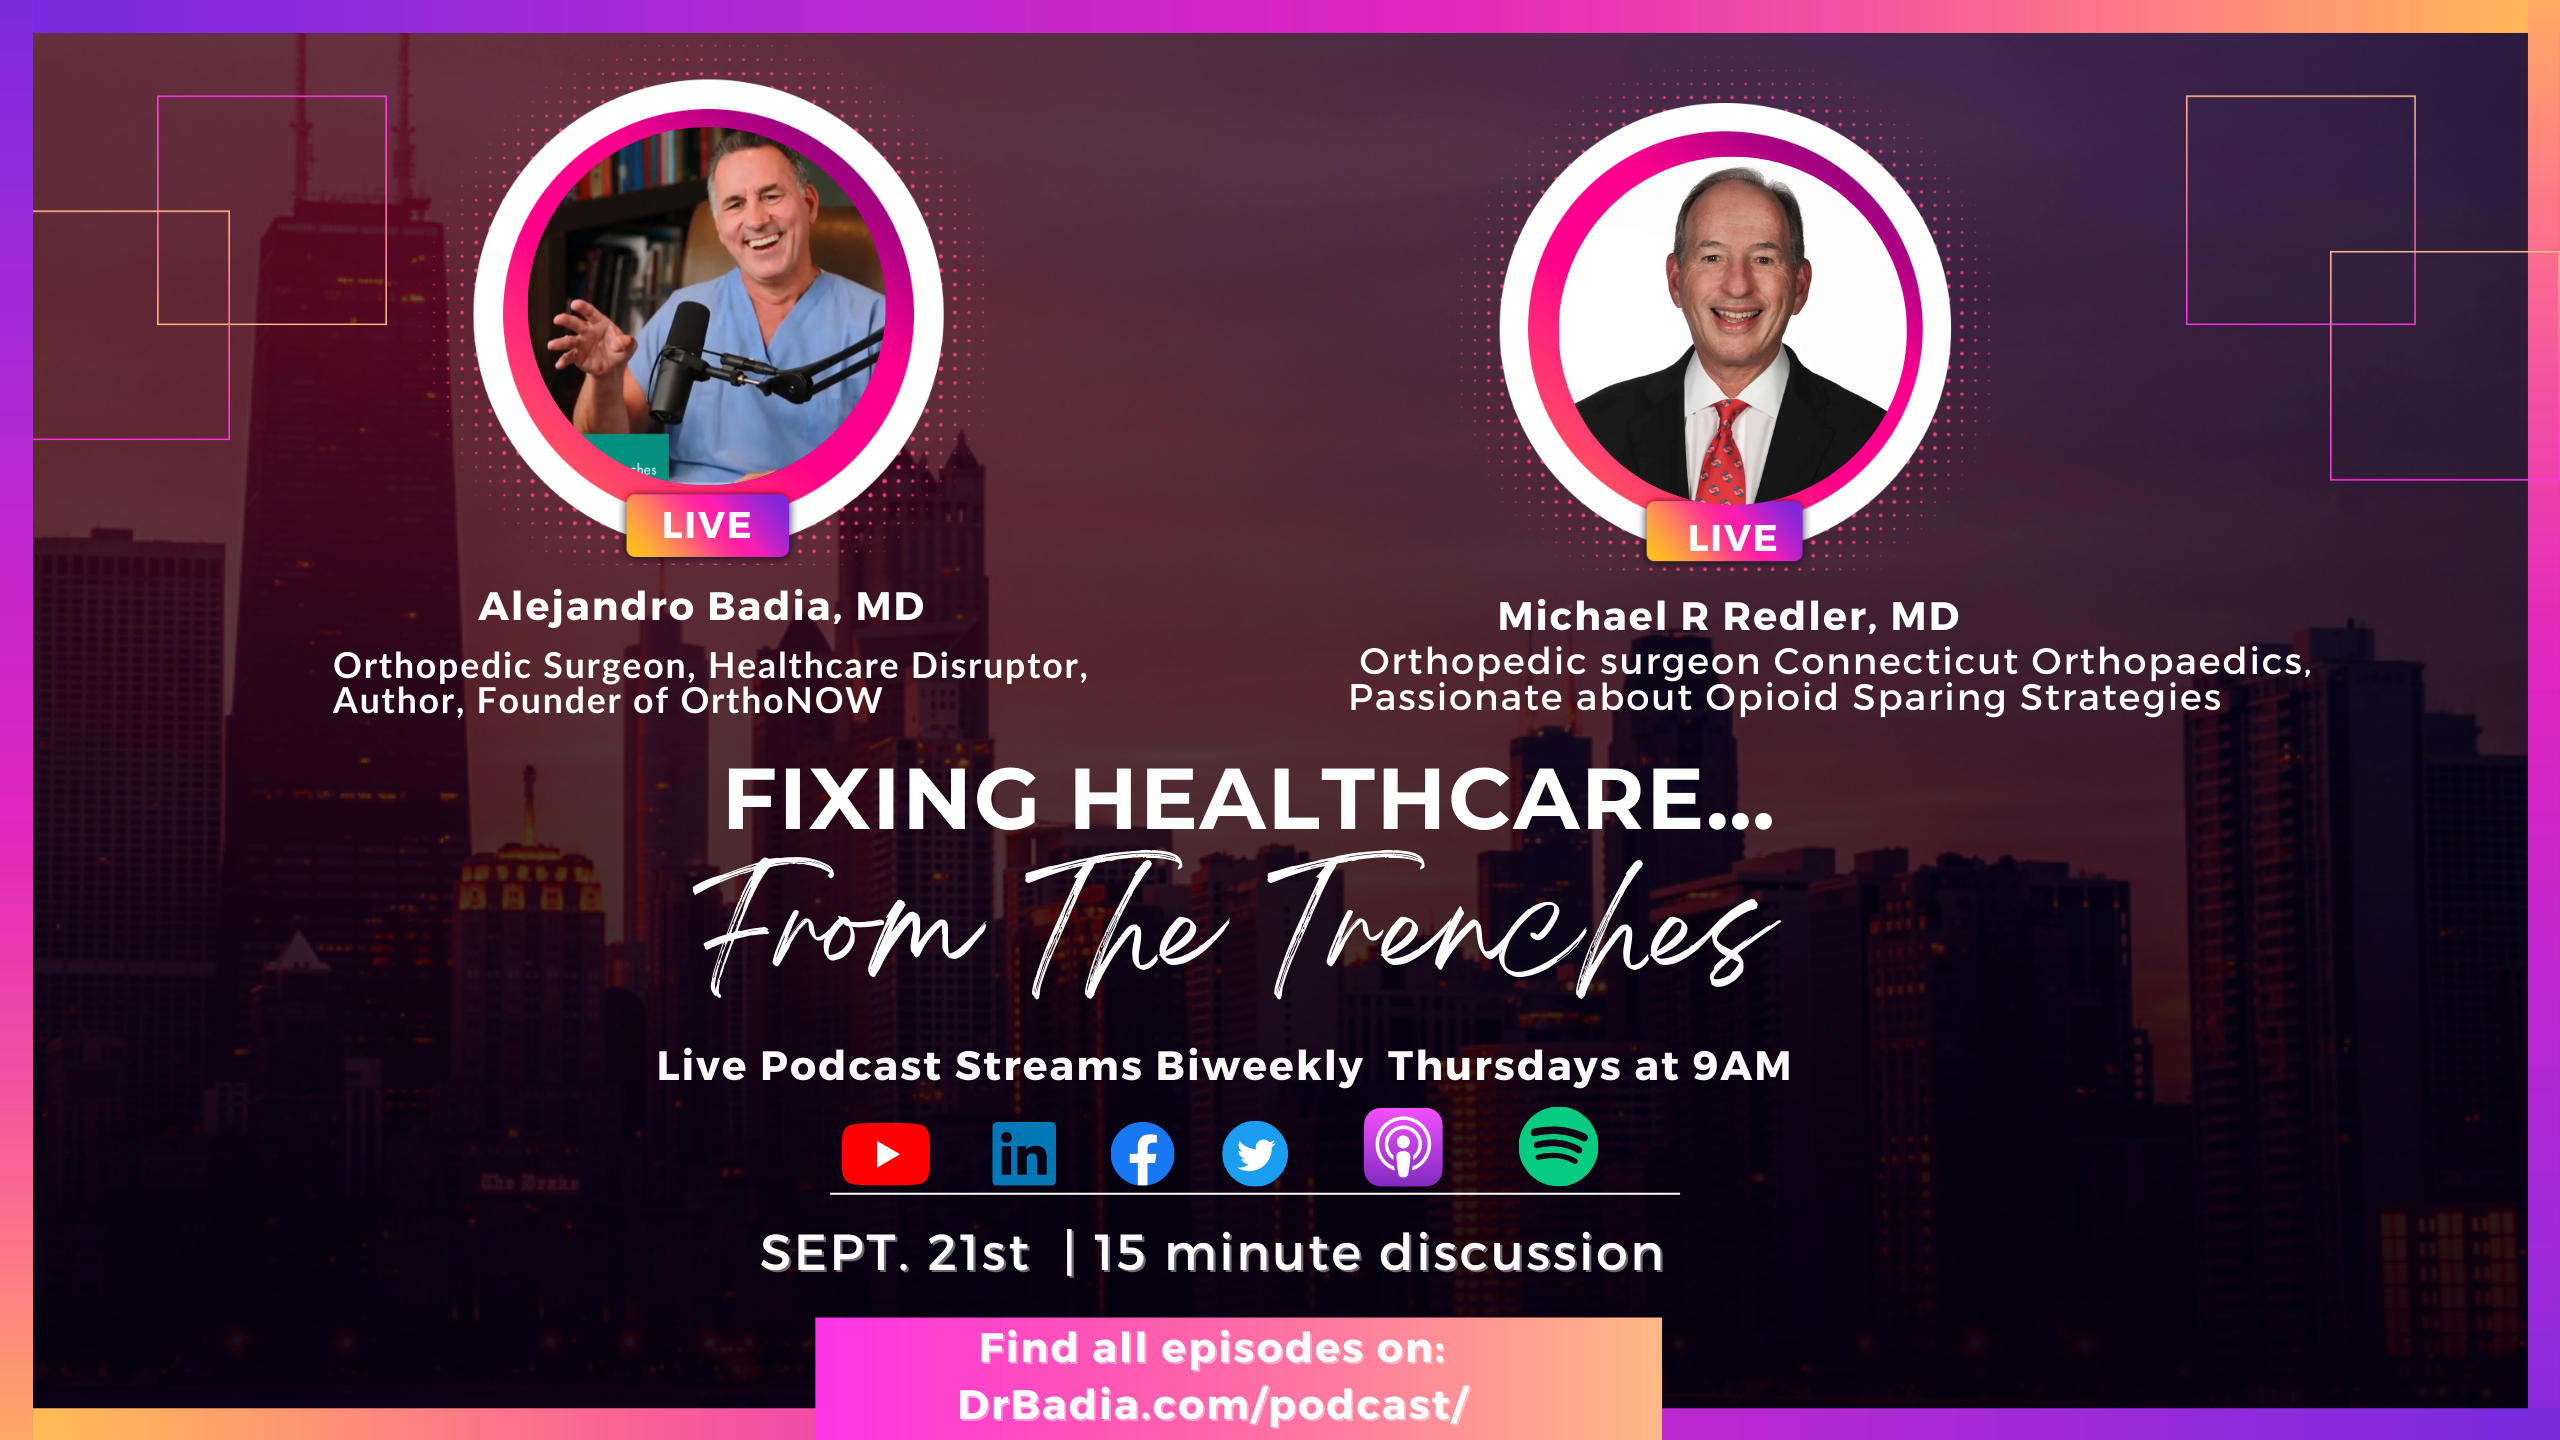 E20 Dr. Redler "Fixing Healthcare...From The Trenches" with Dr. Badia